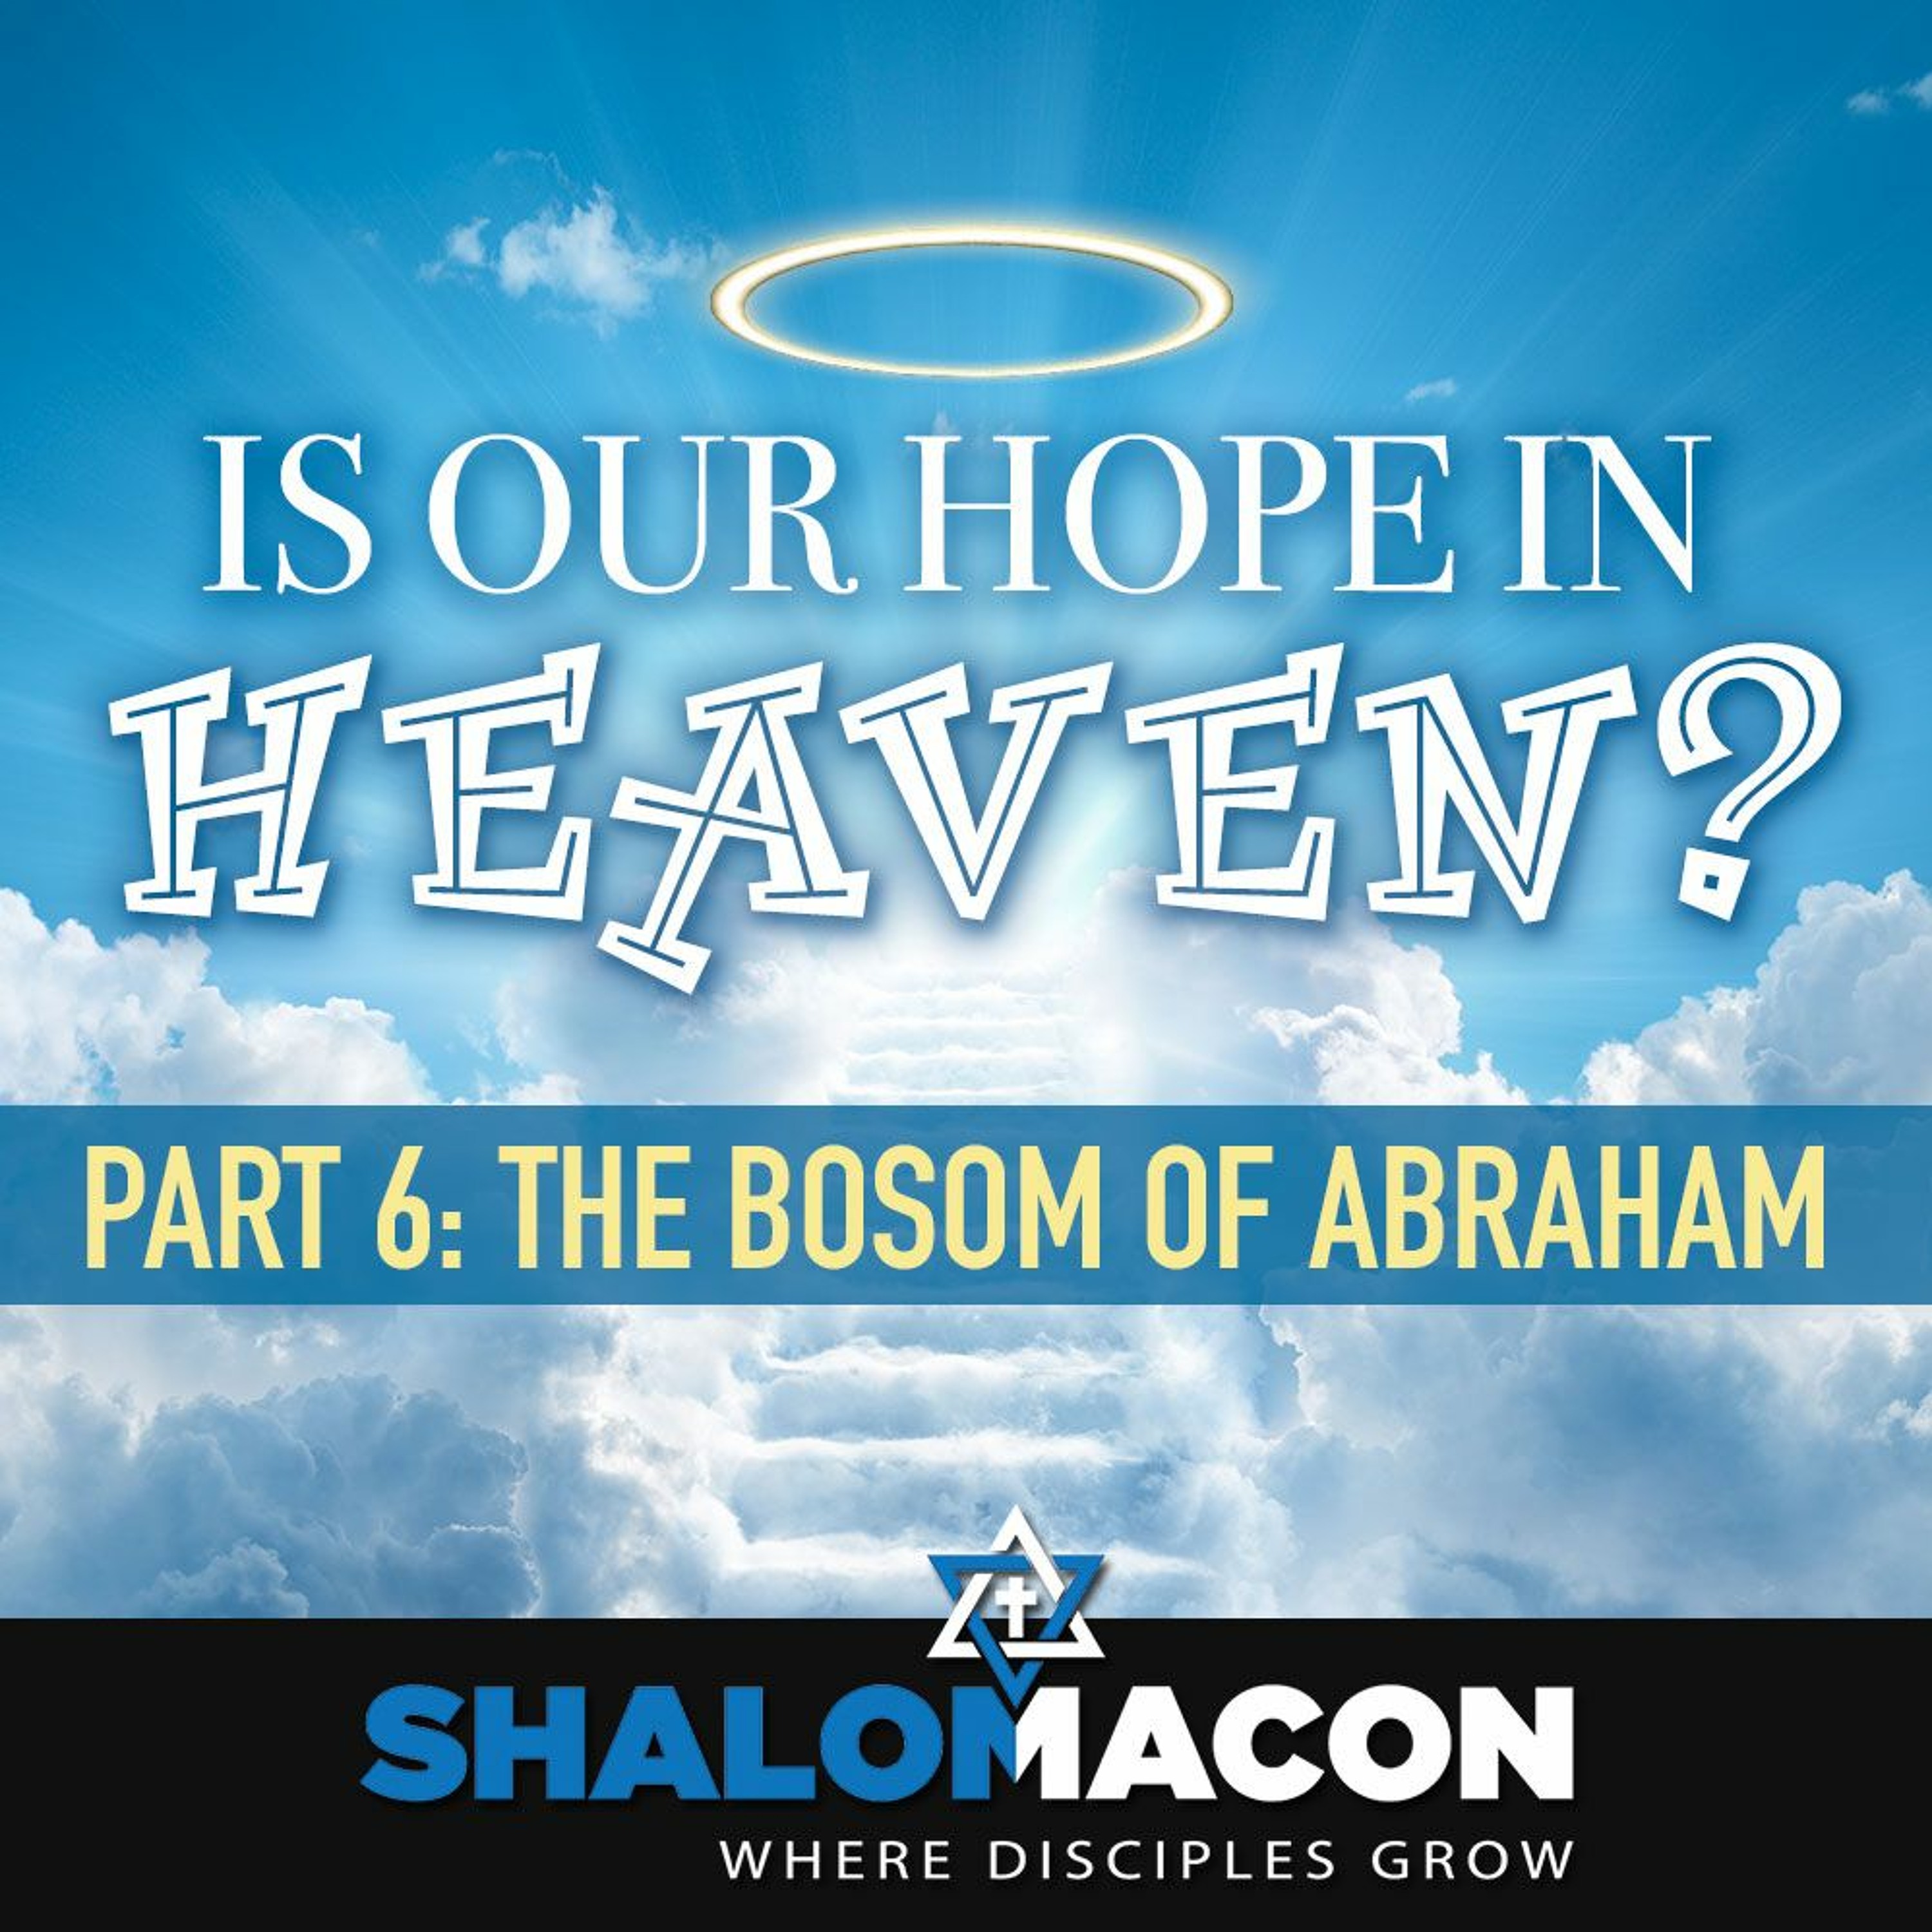 Is Our Hope In Heaven? - Part 6: The Bosom of Abraham